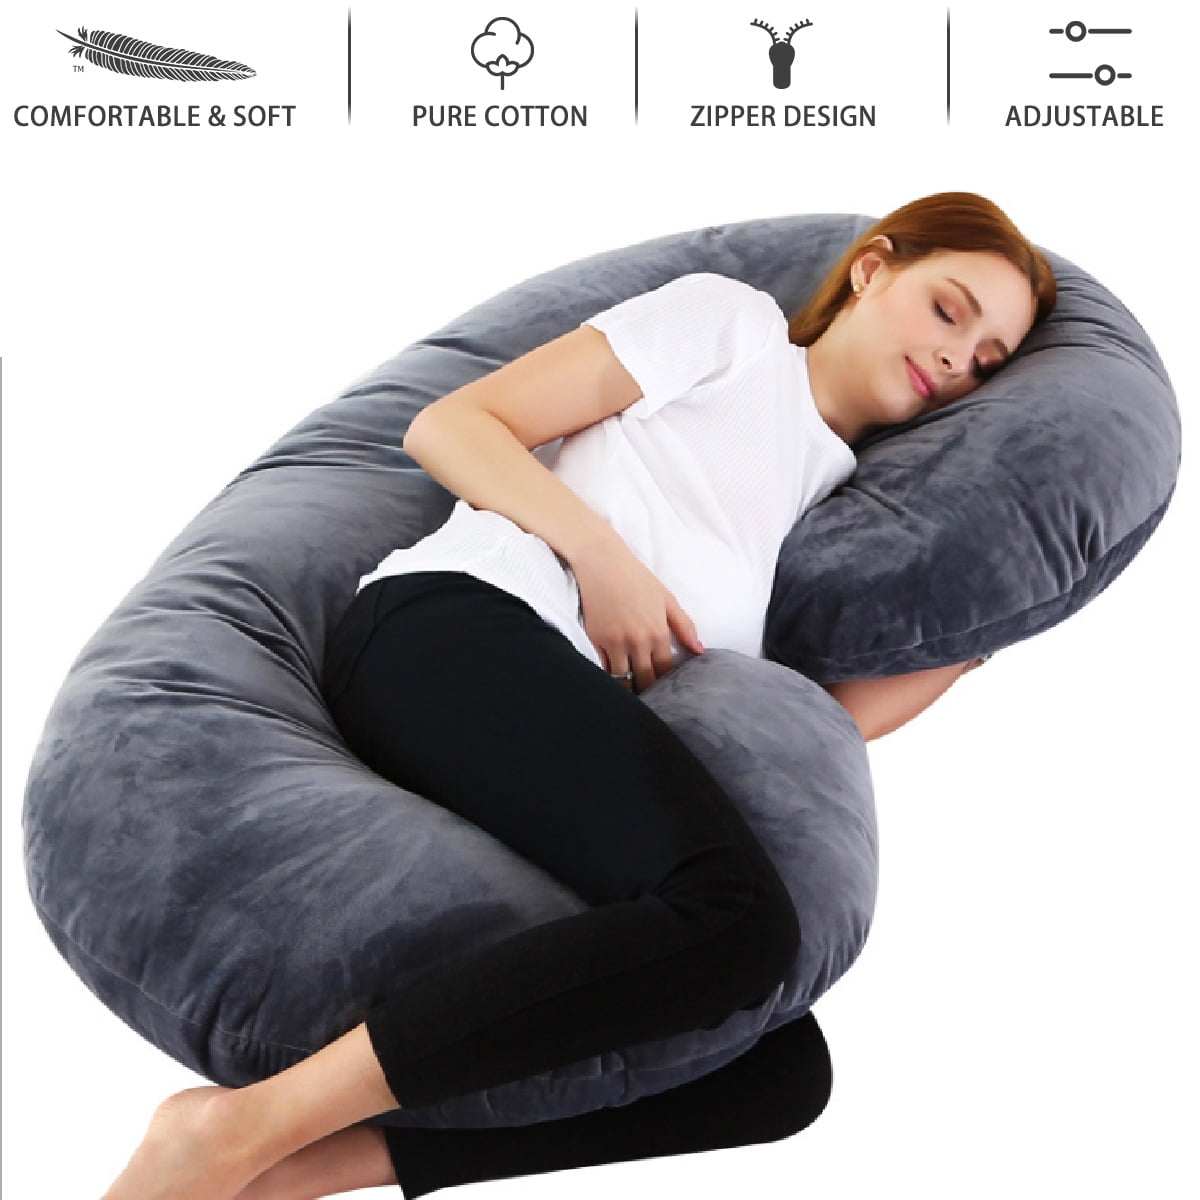 Details about   U Shape Full Body Pregnancy Sleeping Pillow Maternity Support w/Removable Cover